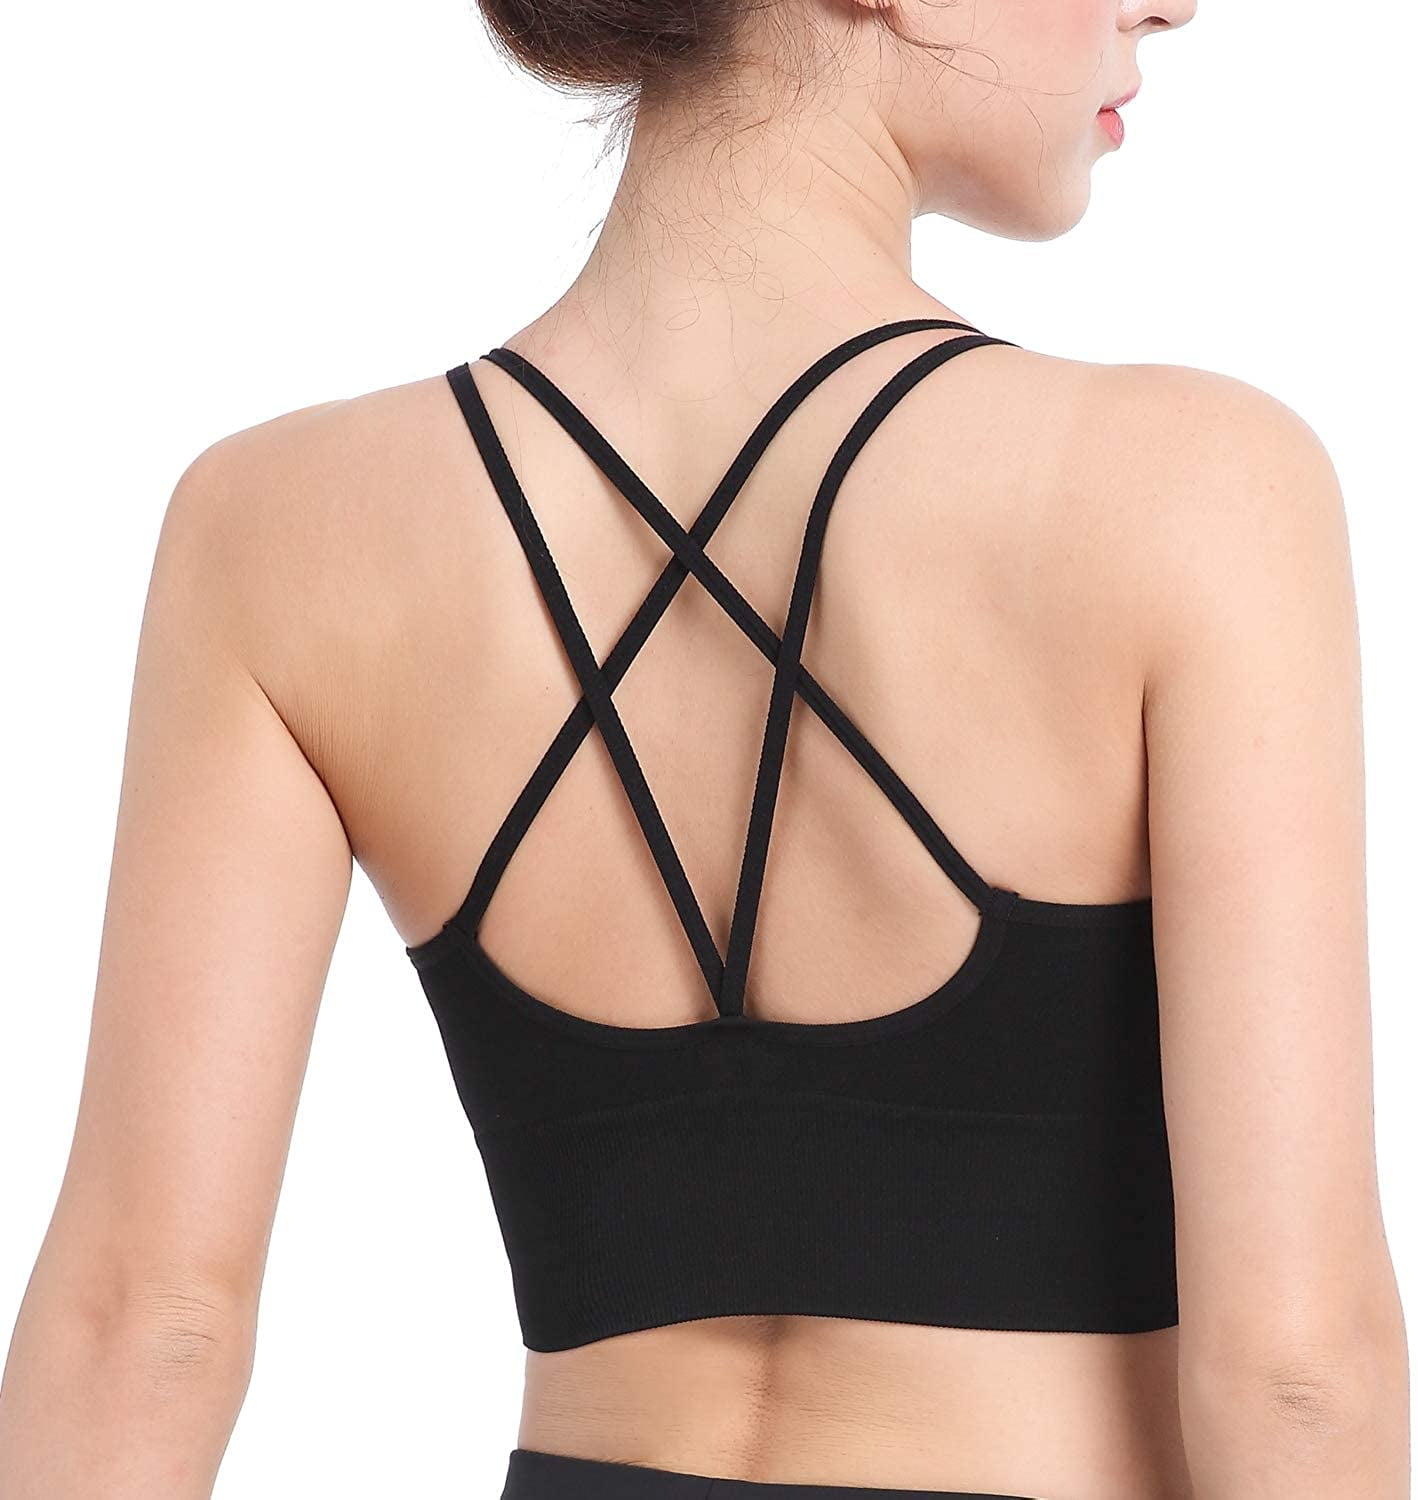 Women Strappy Sports Bra for Women Sexy Crisscross Back for Yoga Running  Athletic Gym Workout Fitness Tank Tops Black - S 